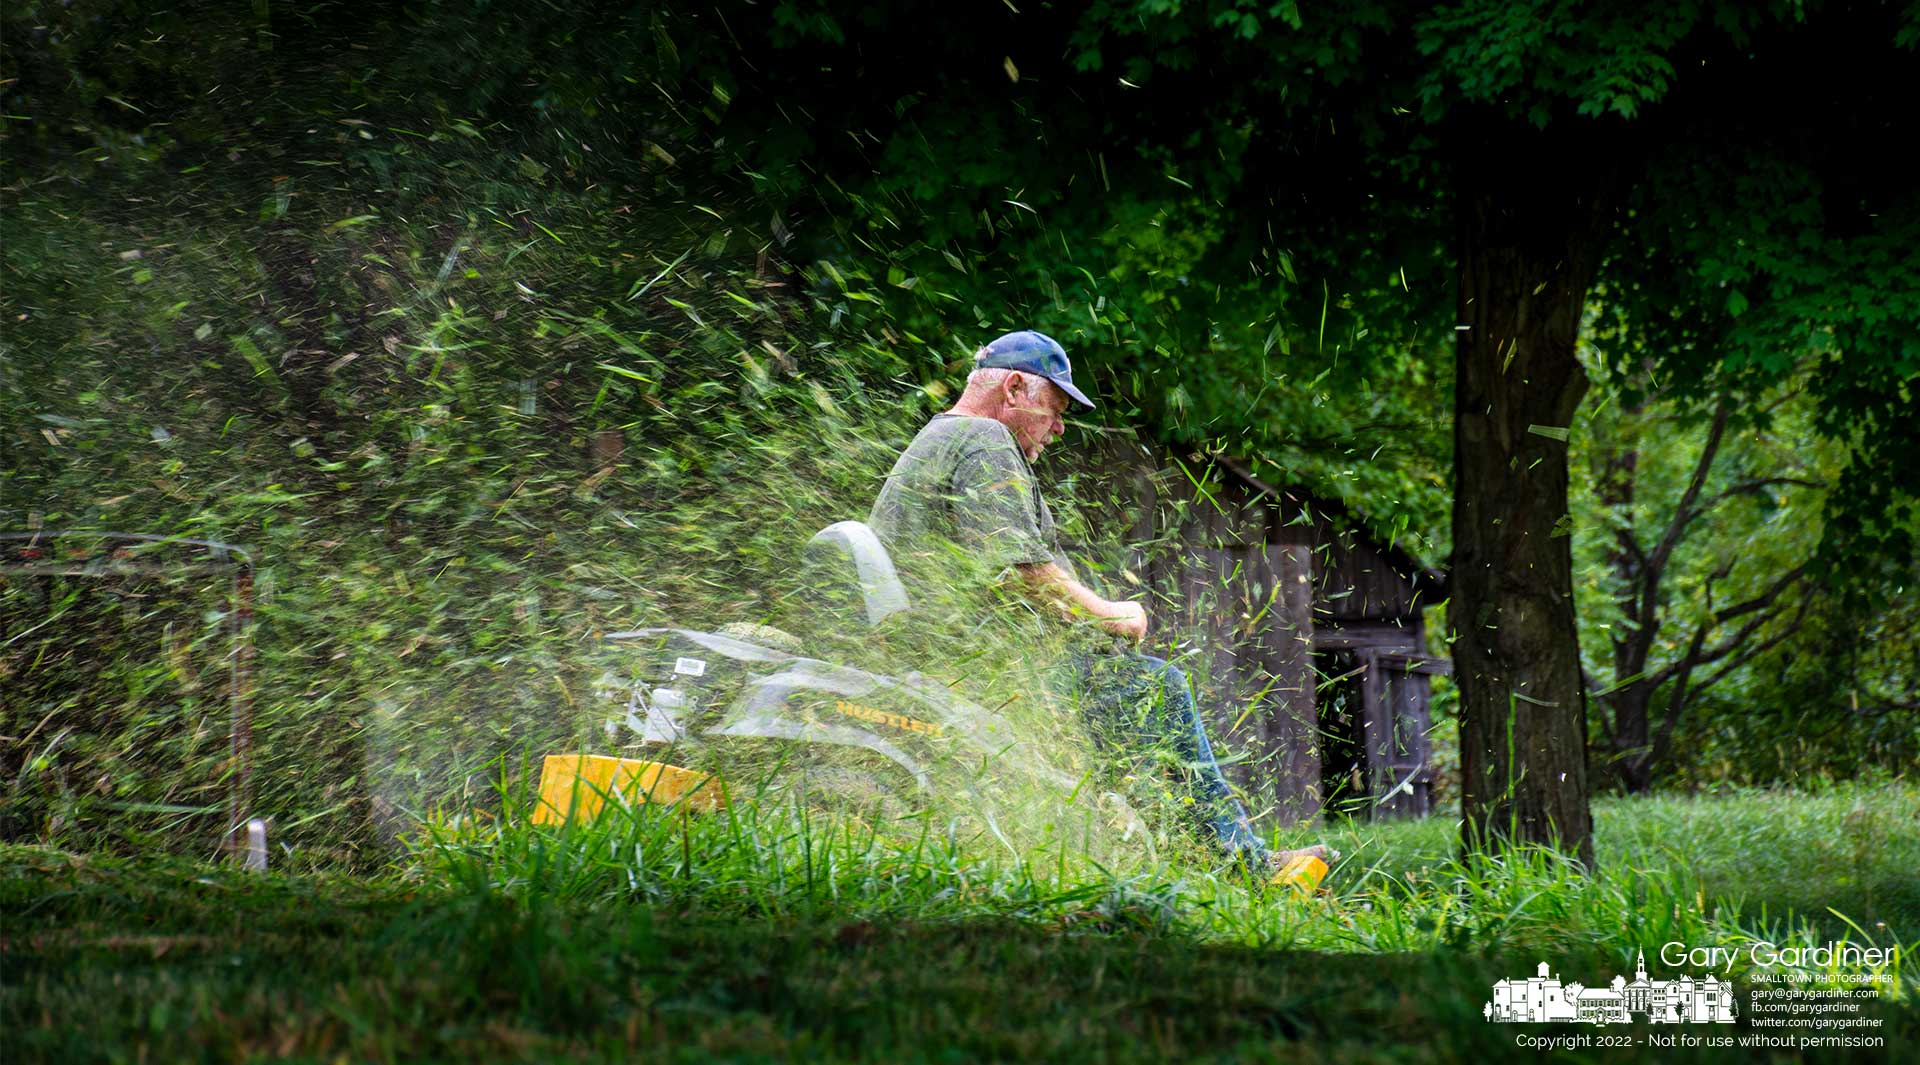 Kevin Scott mows grass around the Sharp family home on Africa road hoping to get it done before the threat of an afternoon rain storm. The rain never came but Scott had to stop when the drive belt for the mower's blade shredded. My Final Photo for August 29, 2022.